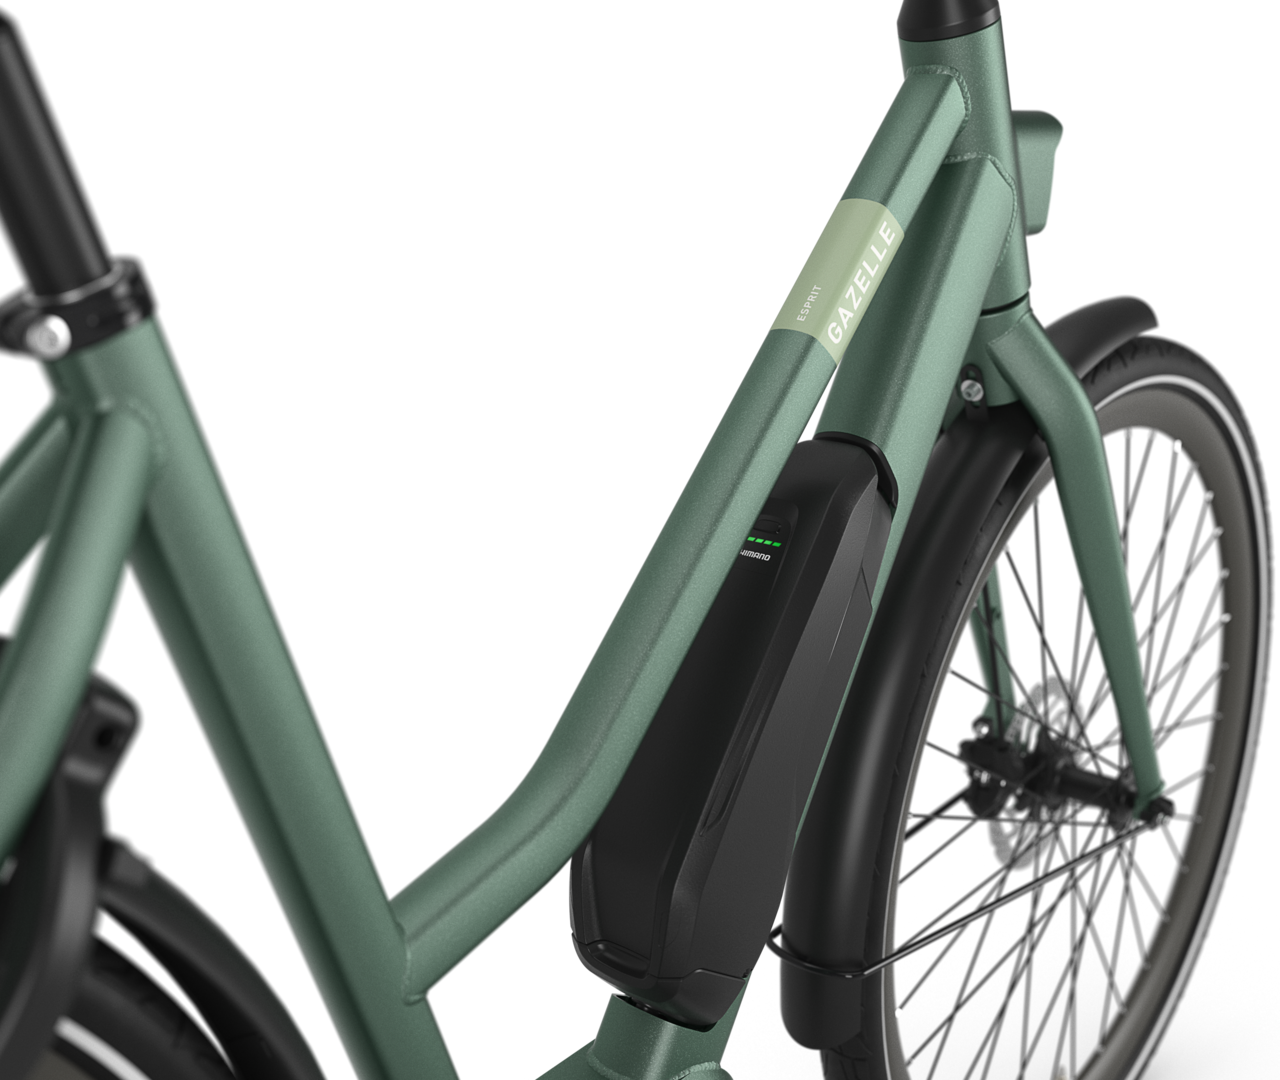 Sturdy from front to back Gazelle Esprit C7 HMS E-bike low-step moss green